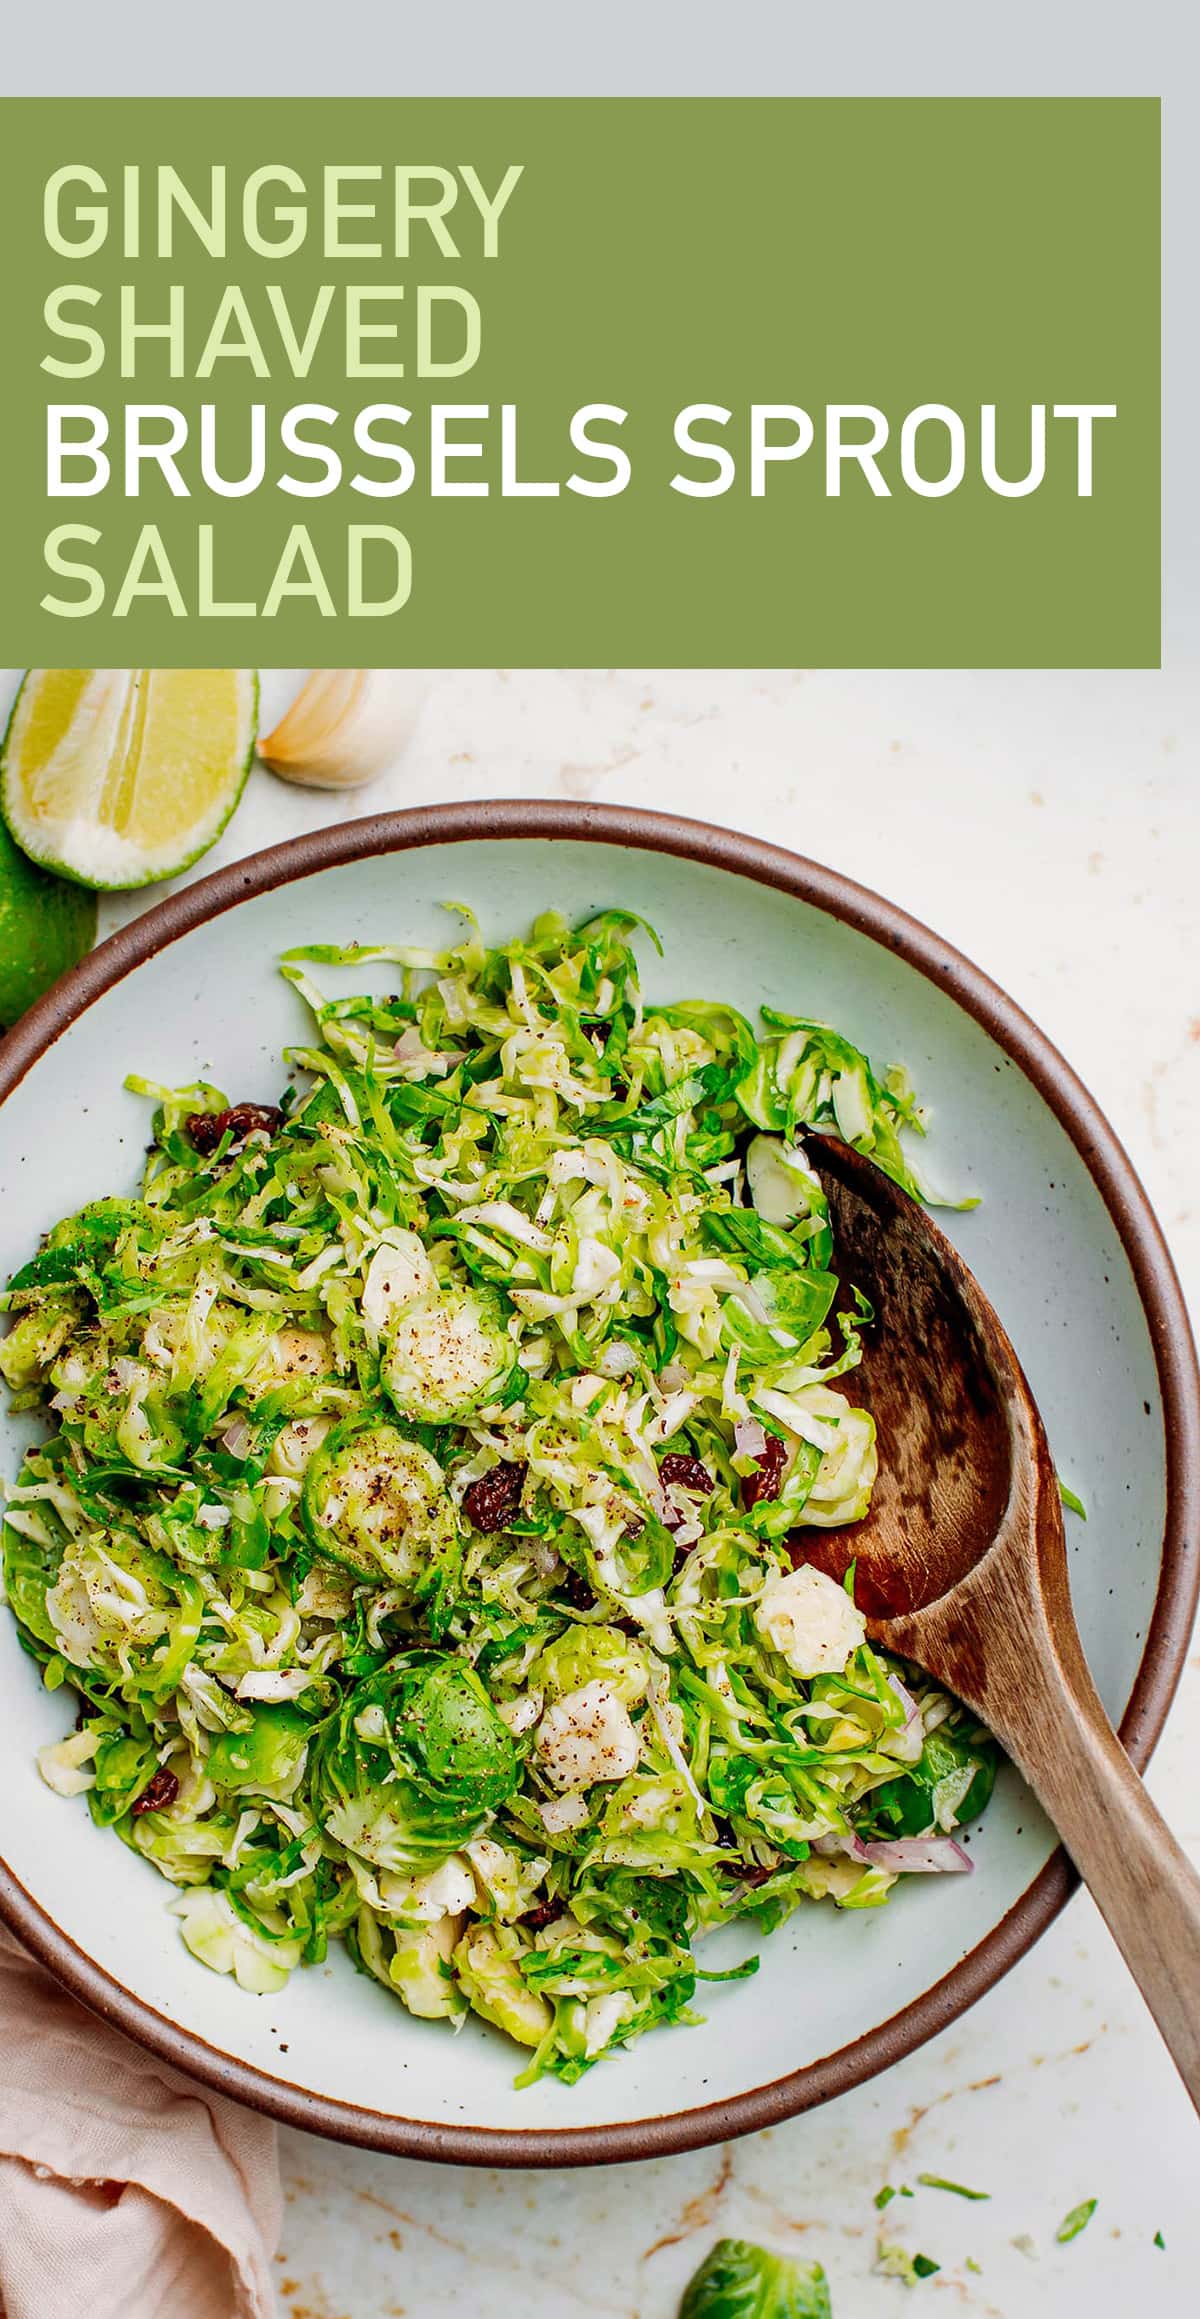 This shaved Brussels sprout salad has a satisfyingly crunchy texture and a zesty dressing infused with fresh ginger, garlic, lime, and shallots. It's a quick and simple side that pairs wonderfully with any festive dish! #brusselssprouts #salad #vegan